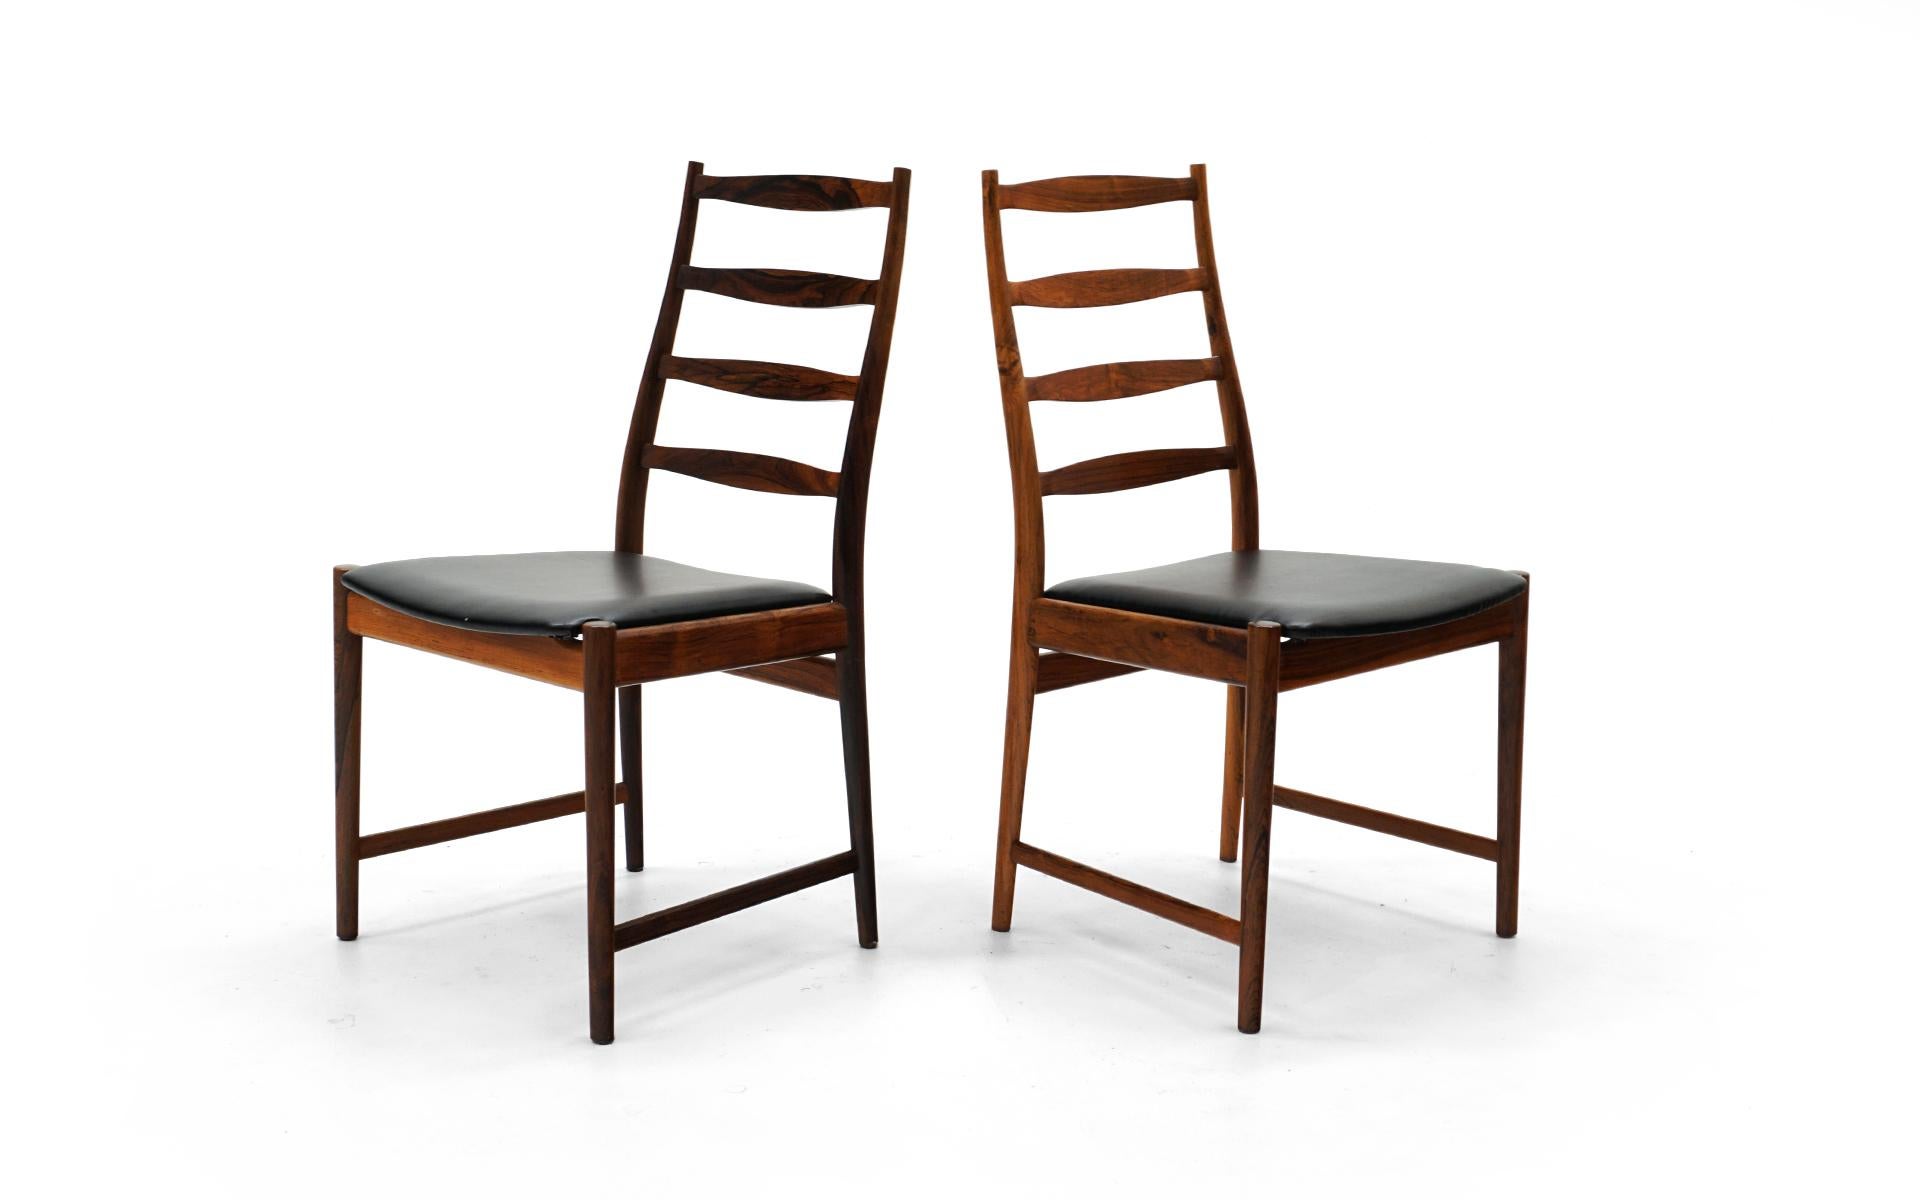 Six Danish Modern Rosewood Ladder Back Dining Chairs by Arne Vodder, Black Seats In Good Condition For Sale In Kansas City, MO